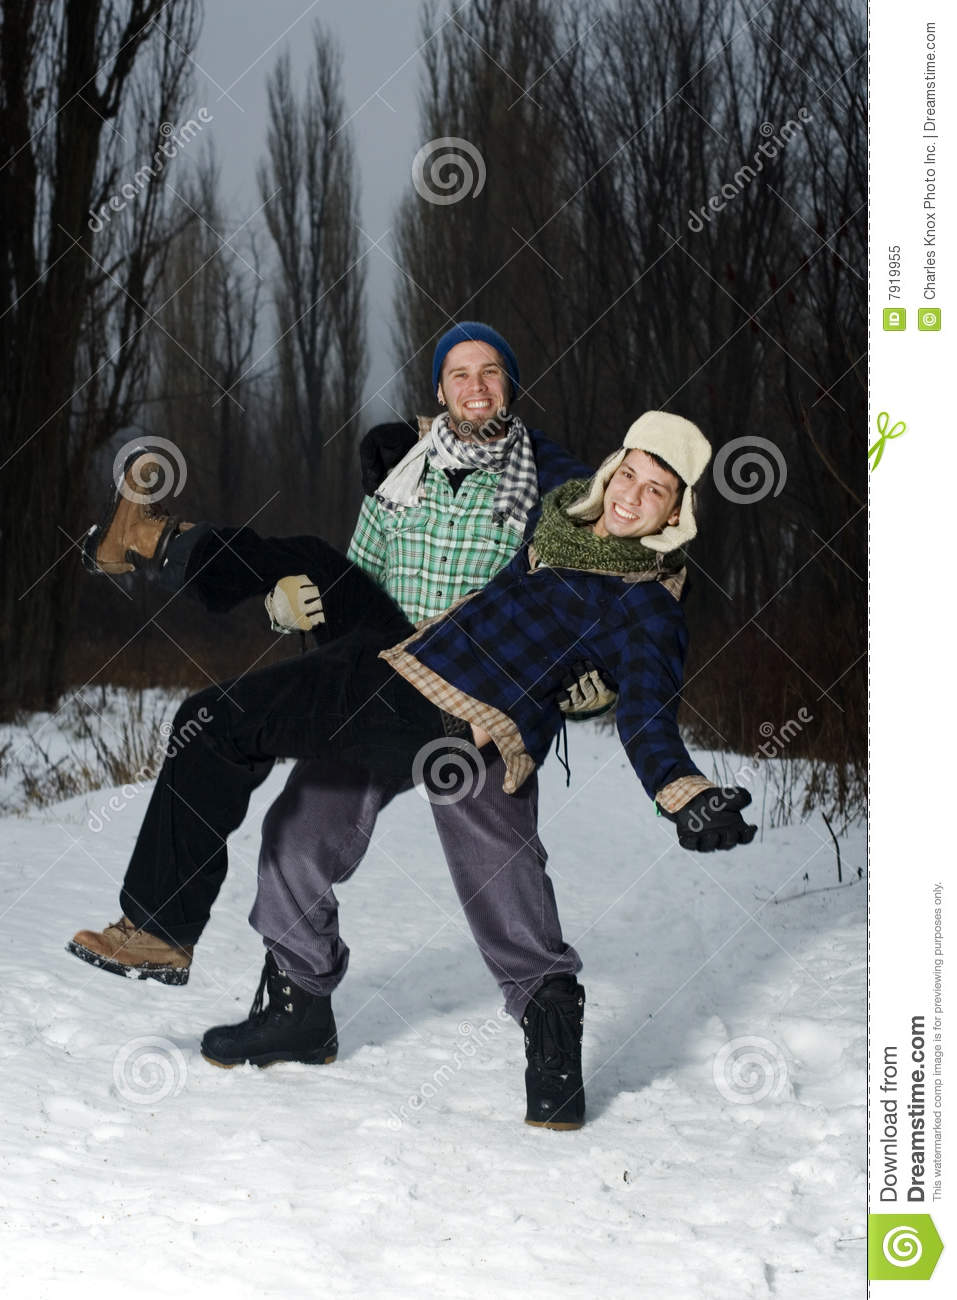 Two Guys In Forest Having Fun Royalty Free Stock Photo   Image